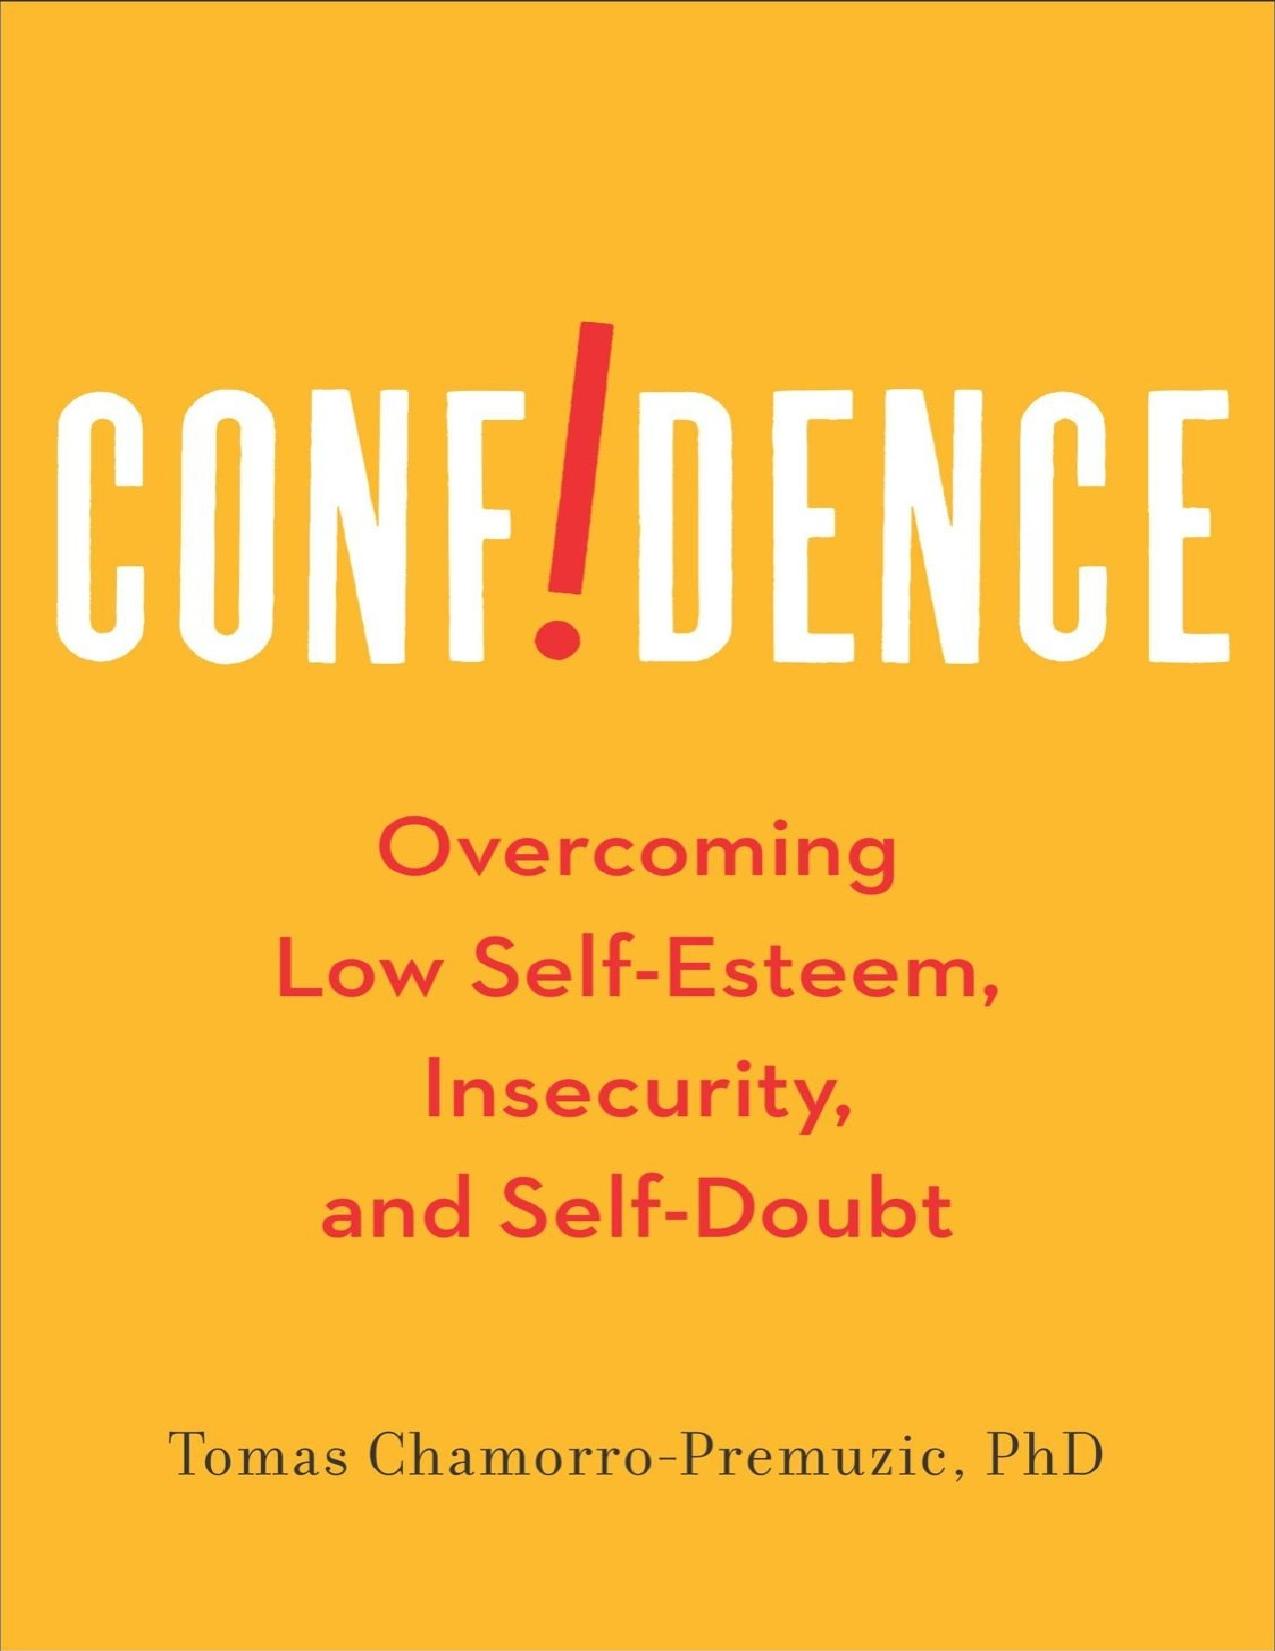 Confidence: Overcoming Low Self-Esteem, Insecurity, and Self-Doubt - PDFDrive.com